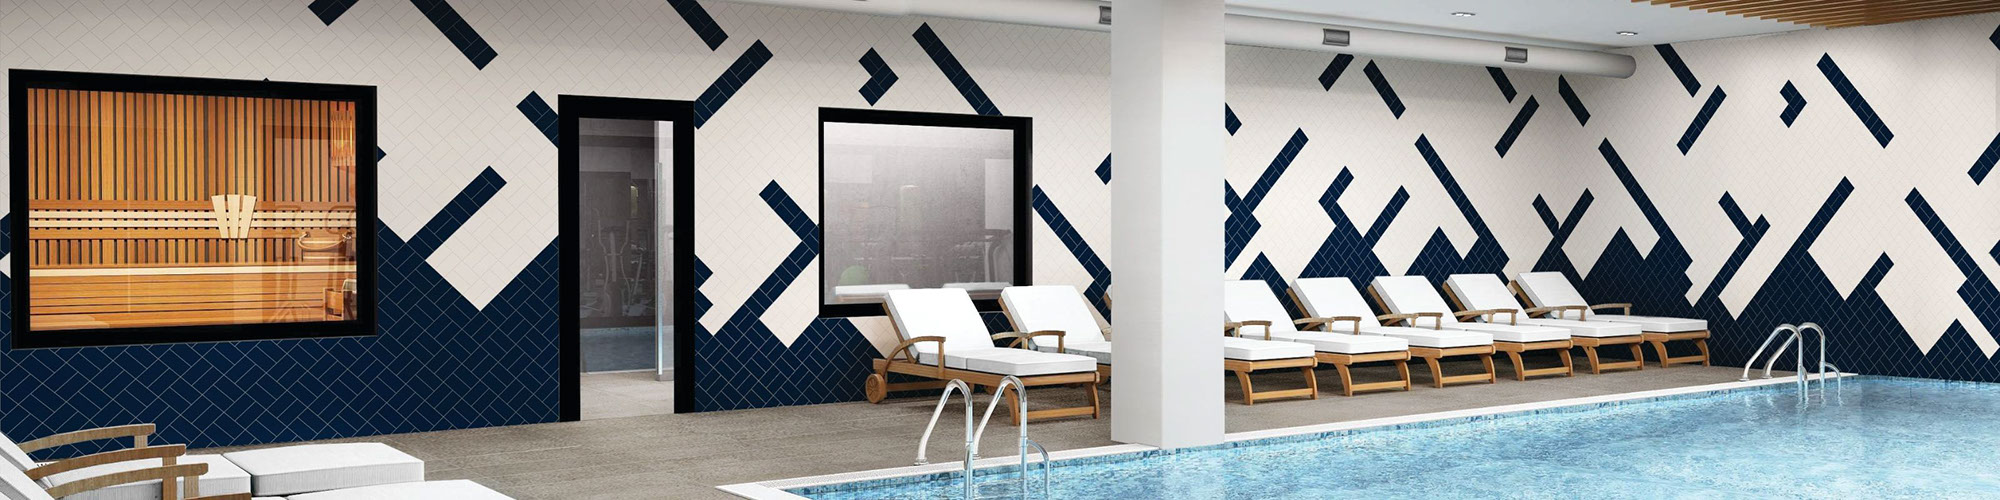 Indoor hotel pool with gray concrete look tile deck, wood lounge chairs with white cushions, and white & navy wall tile in random pattern.